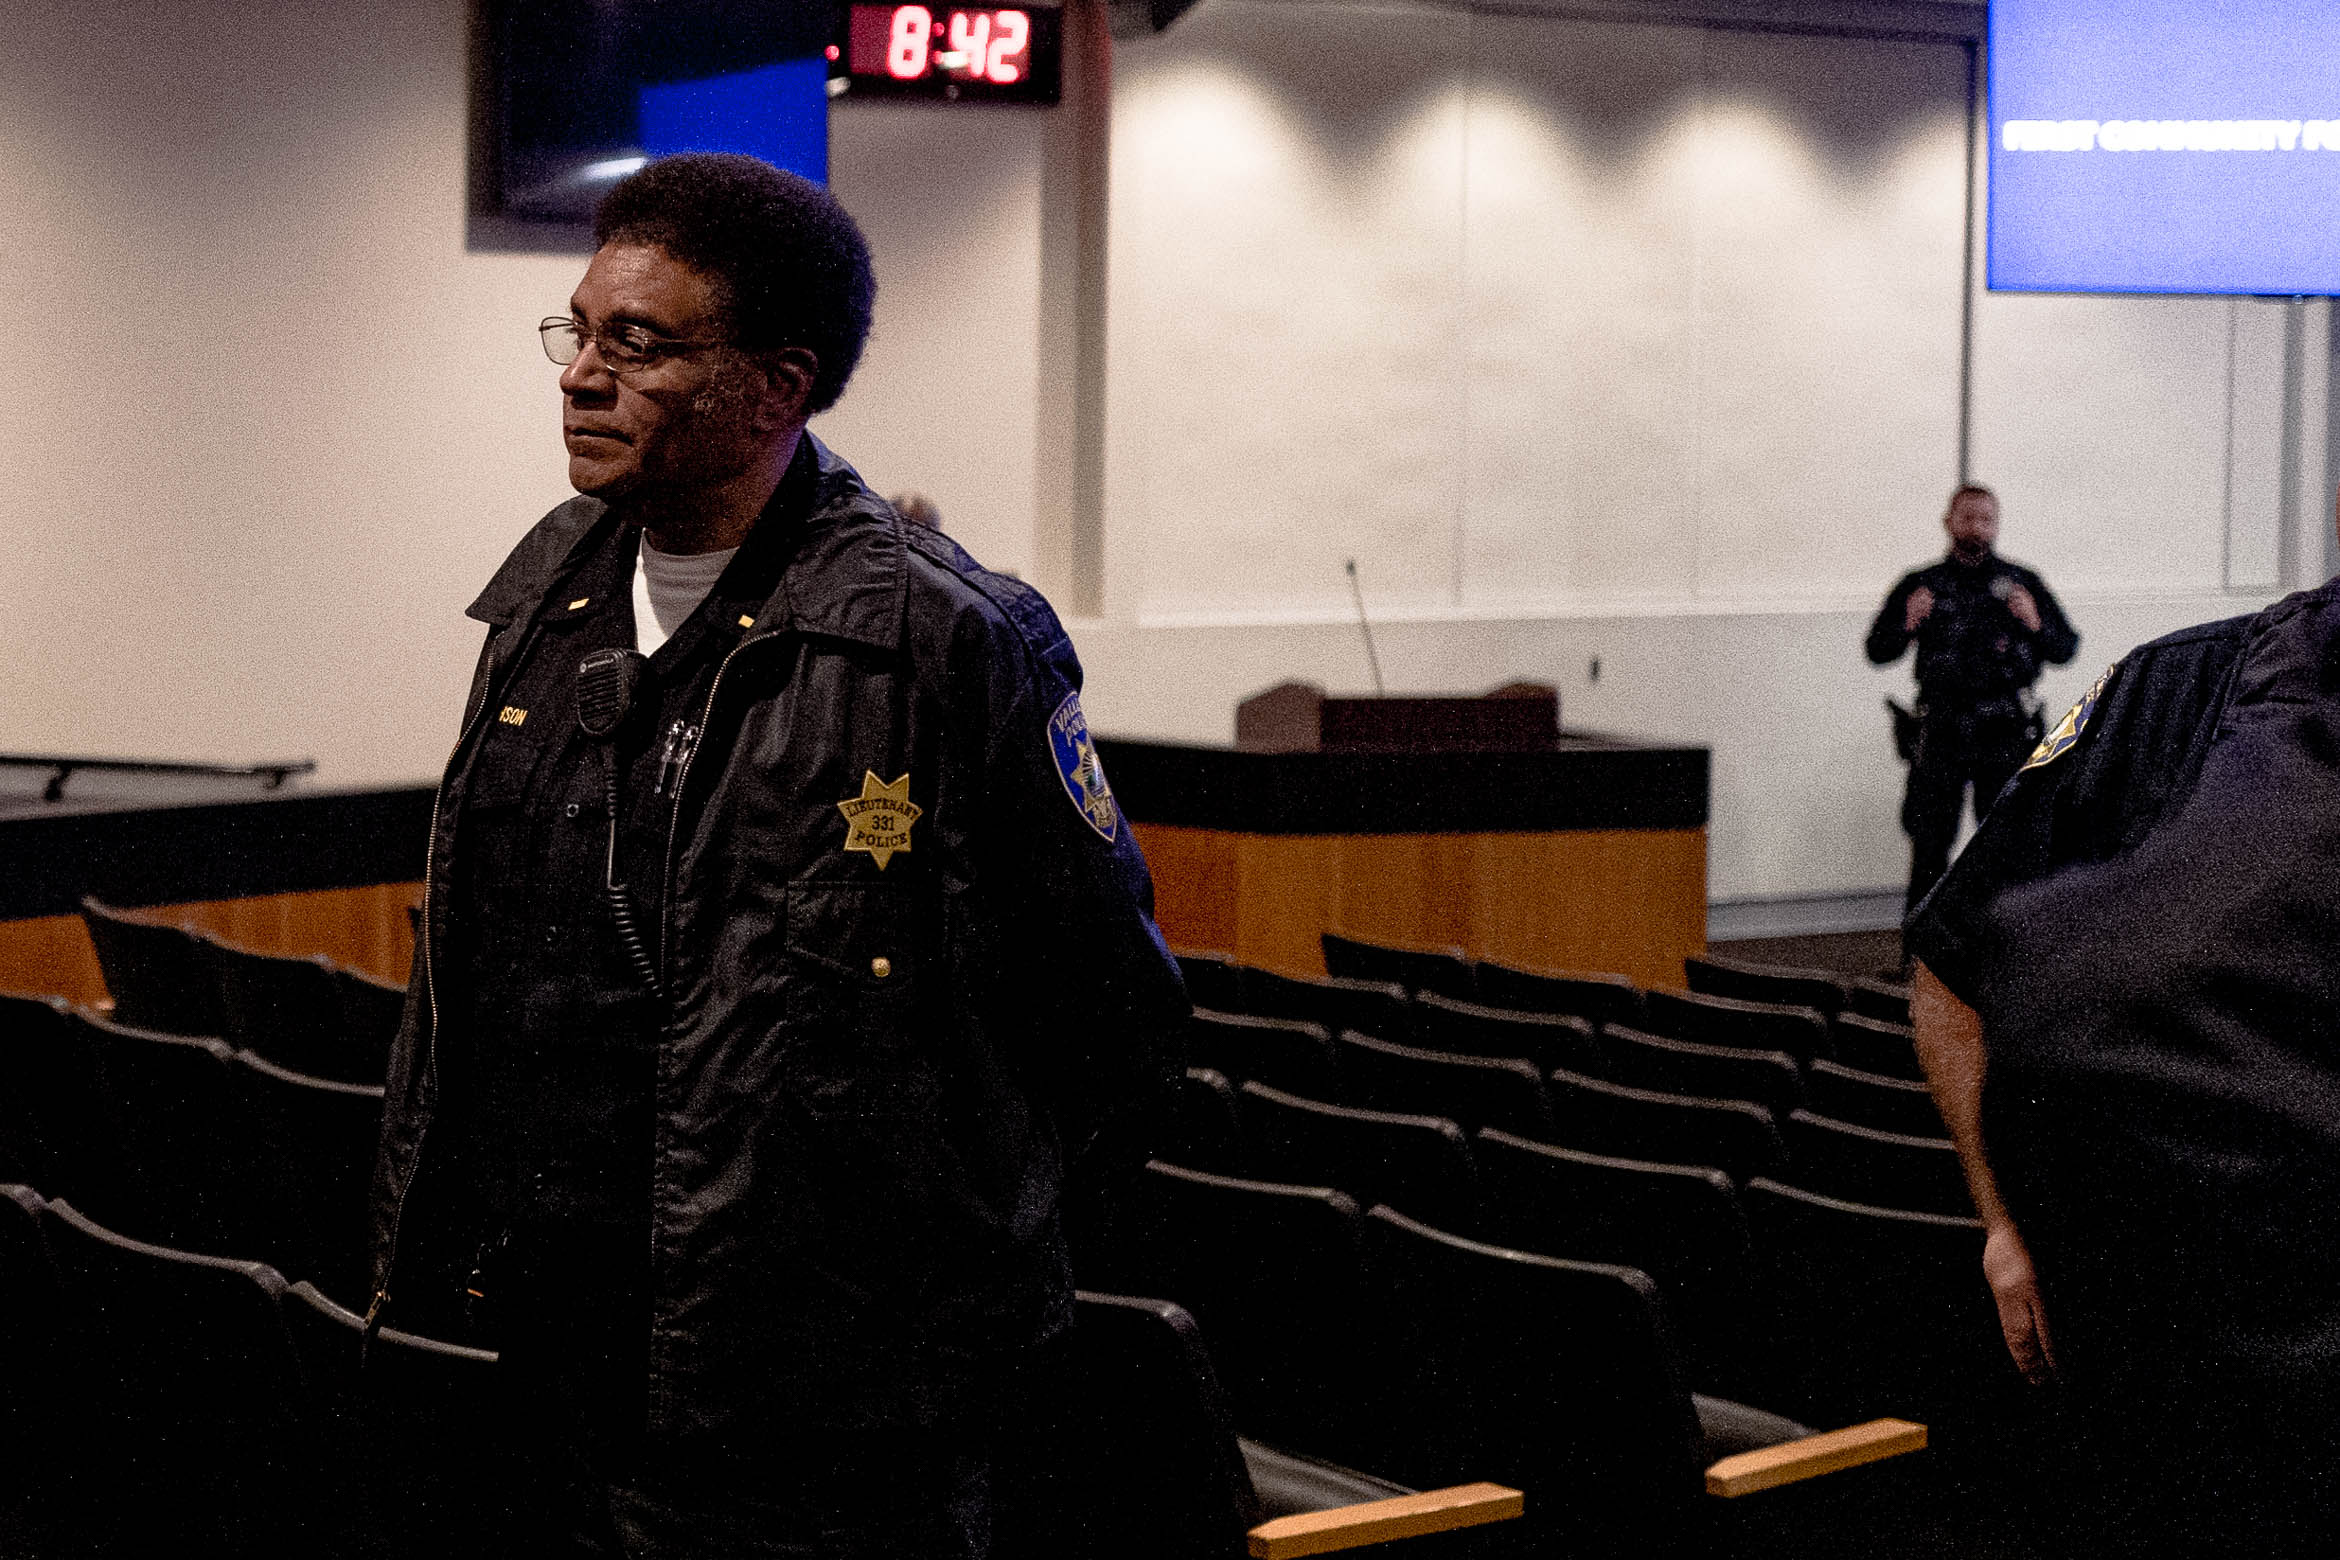 Lt. Herman Robinson helps clear the city council chamber after police declared an unlawful assembly at Vallejo City Hall on May 14, 2019.